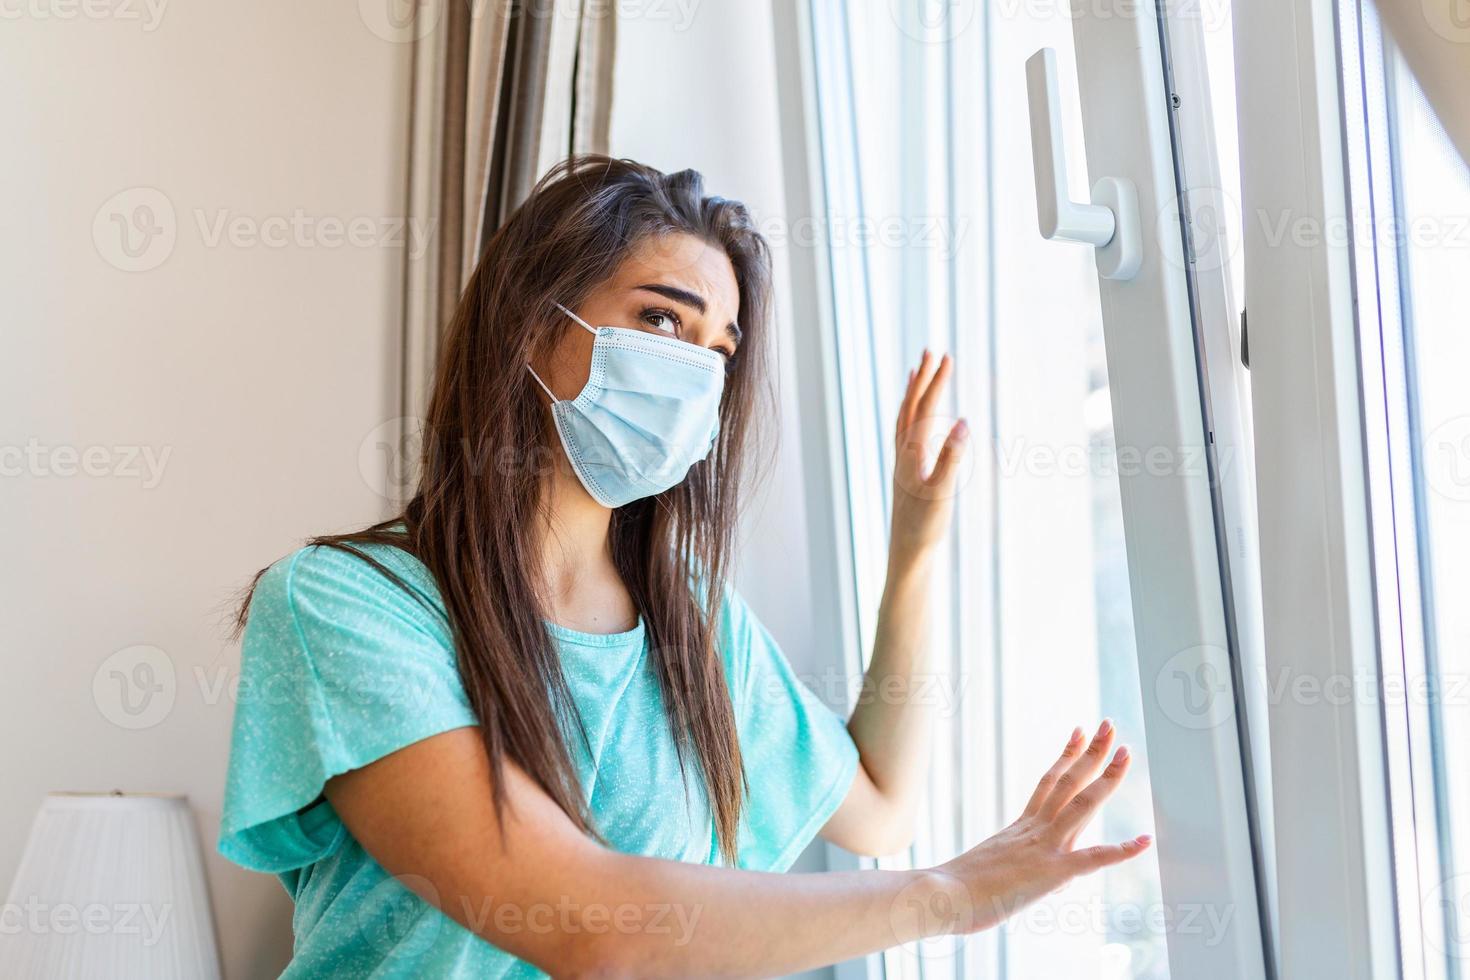 Home quarantine. Caucasian woman sitting at window in a medical mask, looking out, wants to go out. protection against coronavirus infection, pandemics, disease outbreaks and epidemics. photo